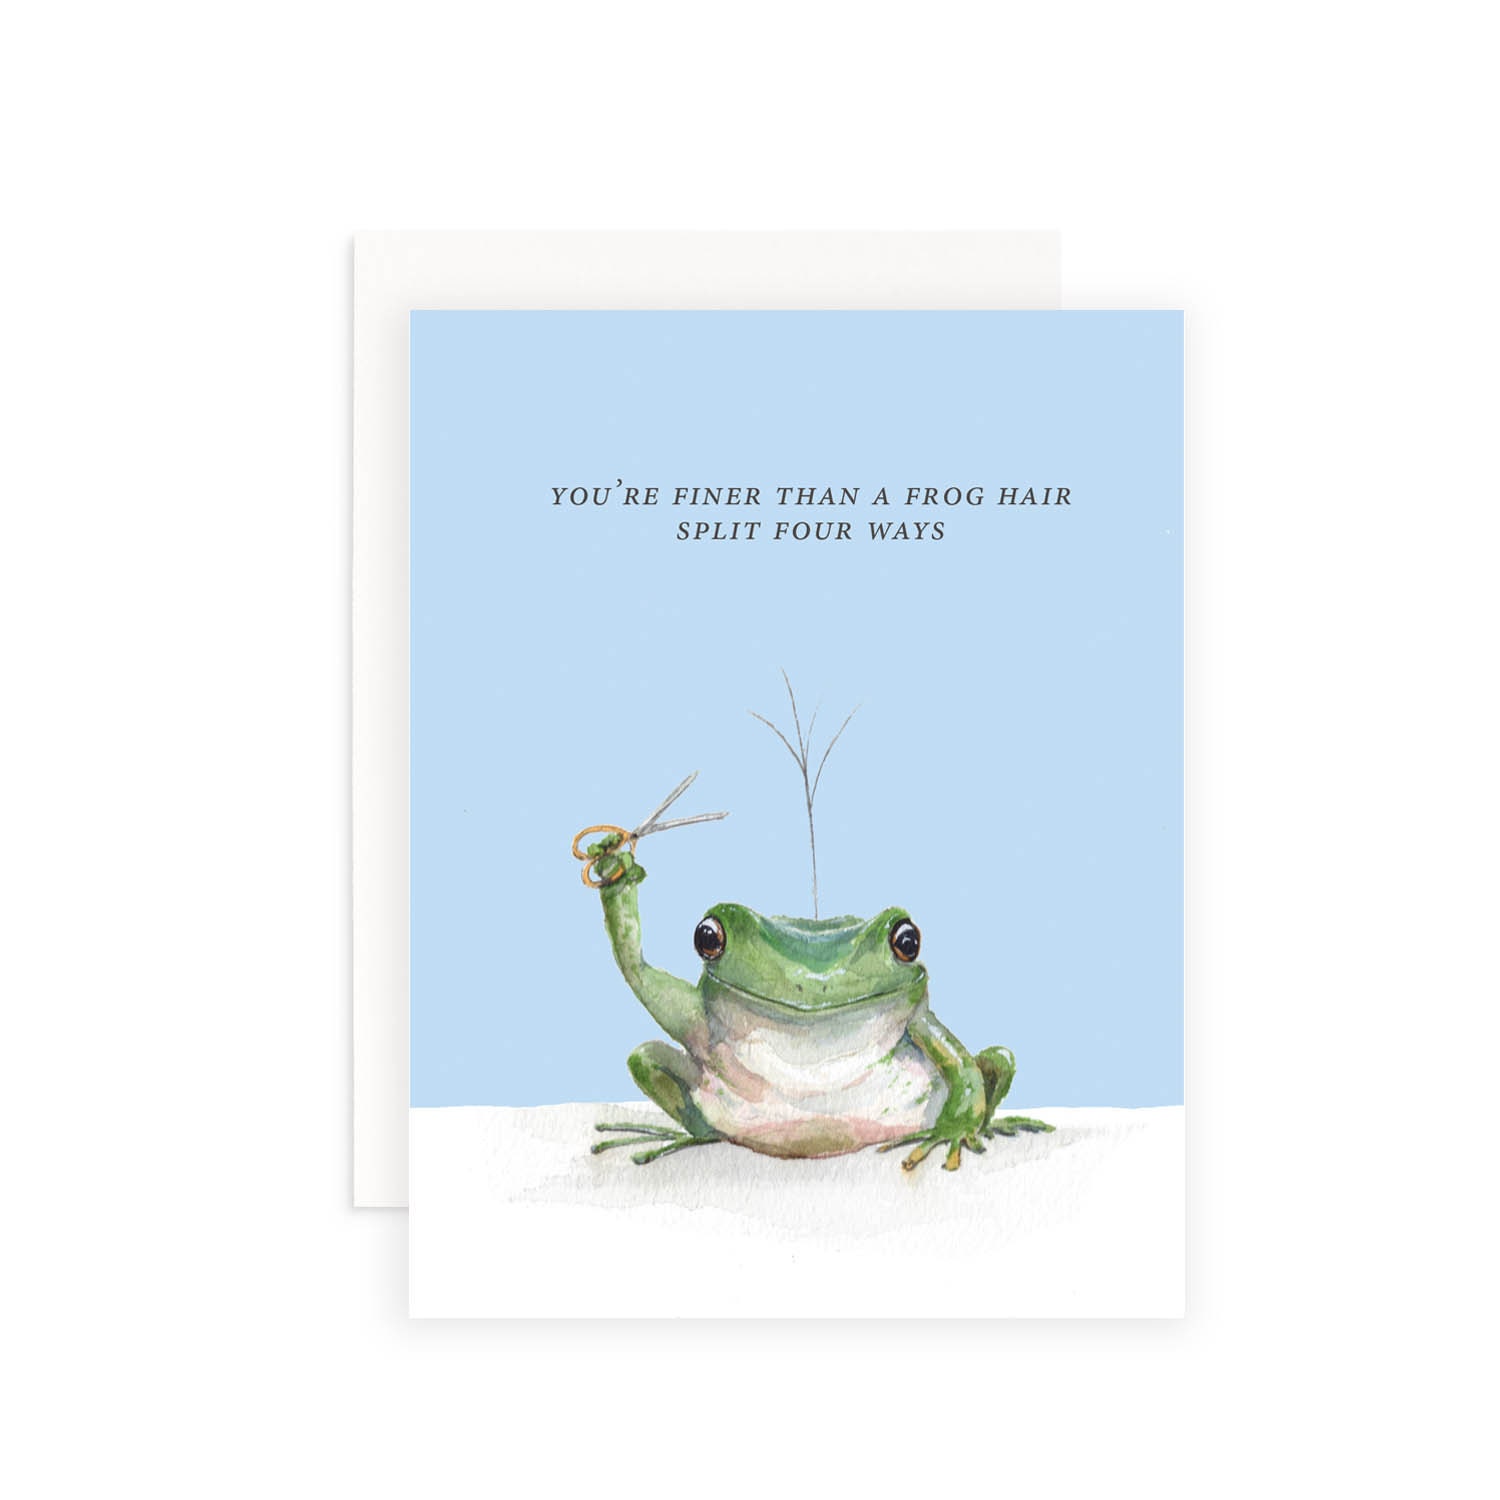 You're Finer Than a Frog Hair Split Four Ways Greeting Card, Love Card,  Anniversary Card, Frog Card, Frog Puns, Animal Puns -  Canada